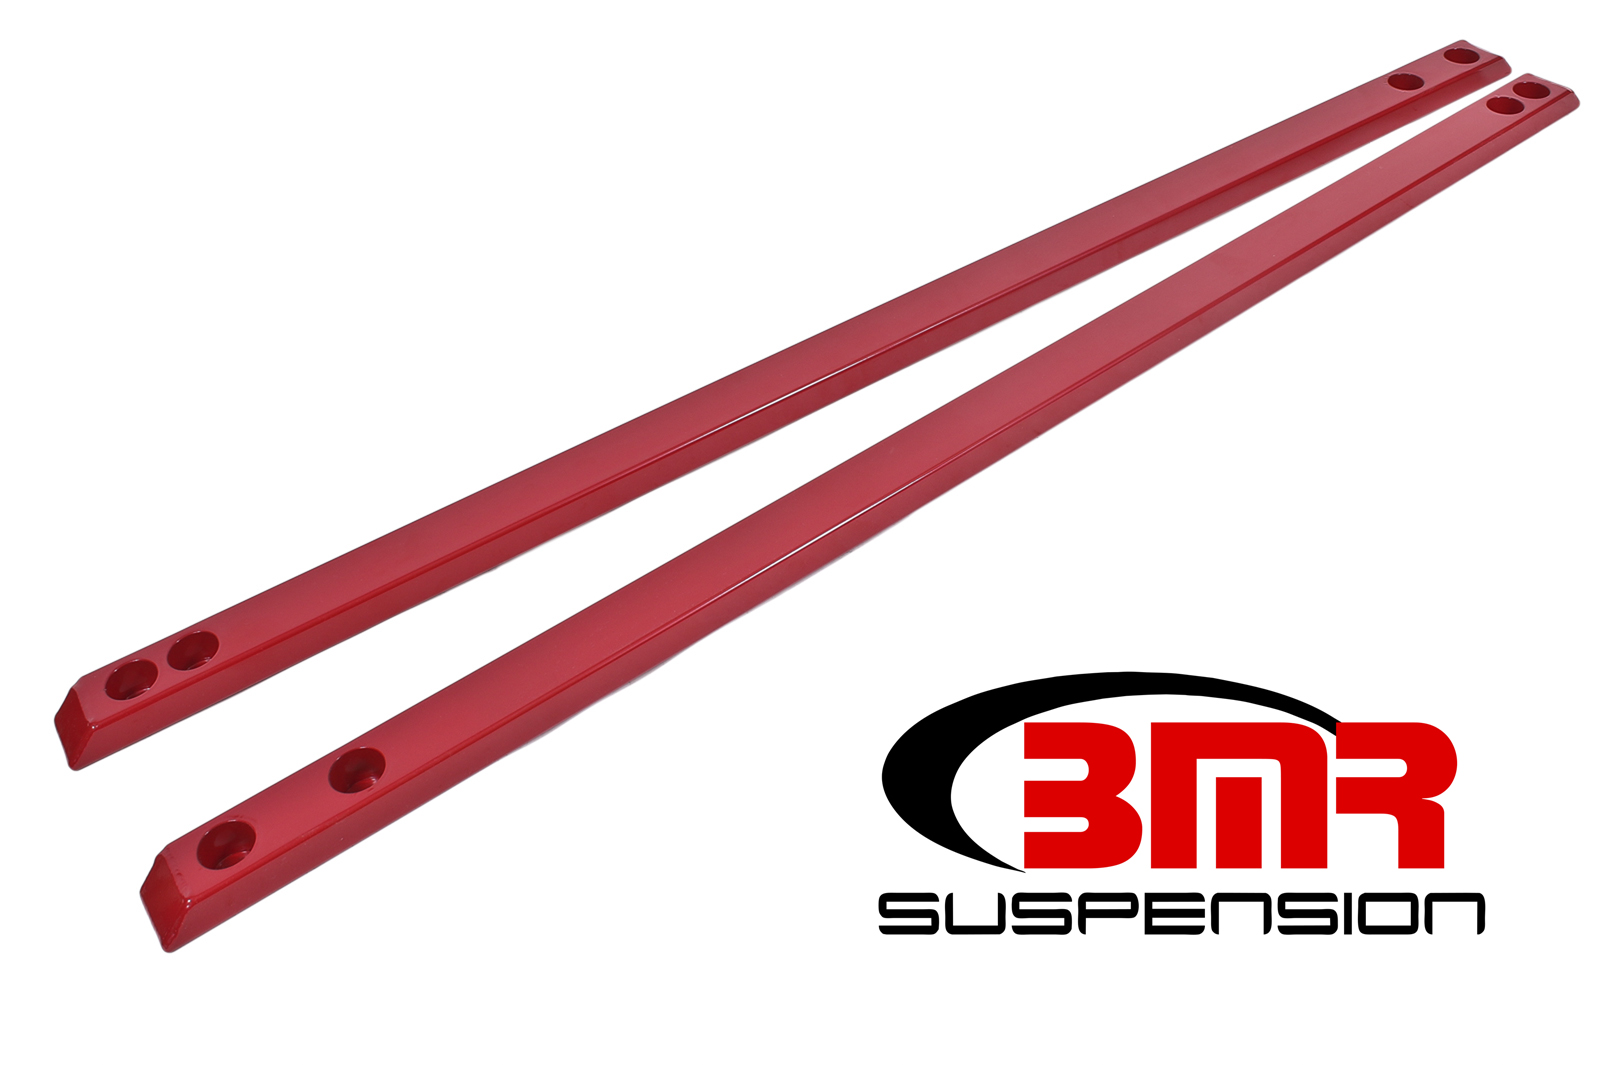 Chassis Jacking Rail, Super Low Profile, 2015-2018 Mustang, BMR Suspension - CJR002R